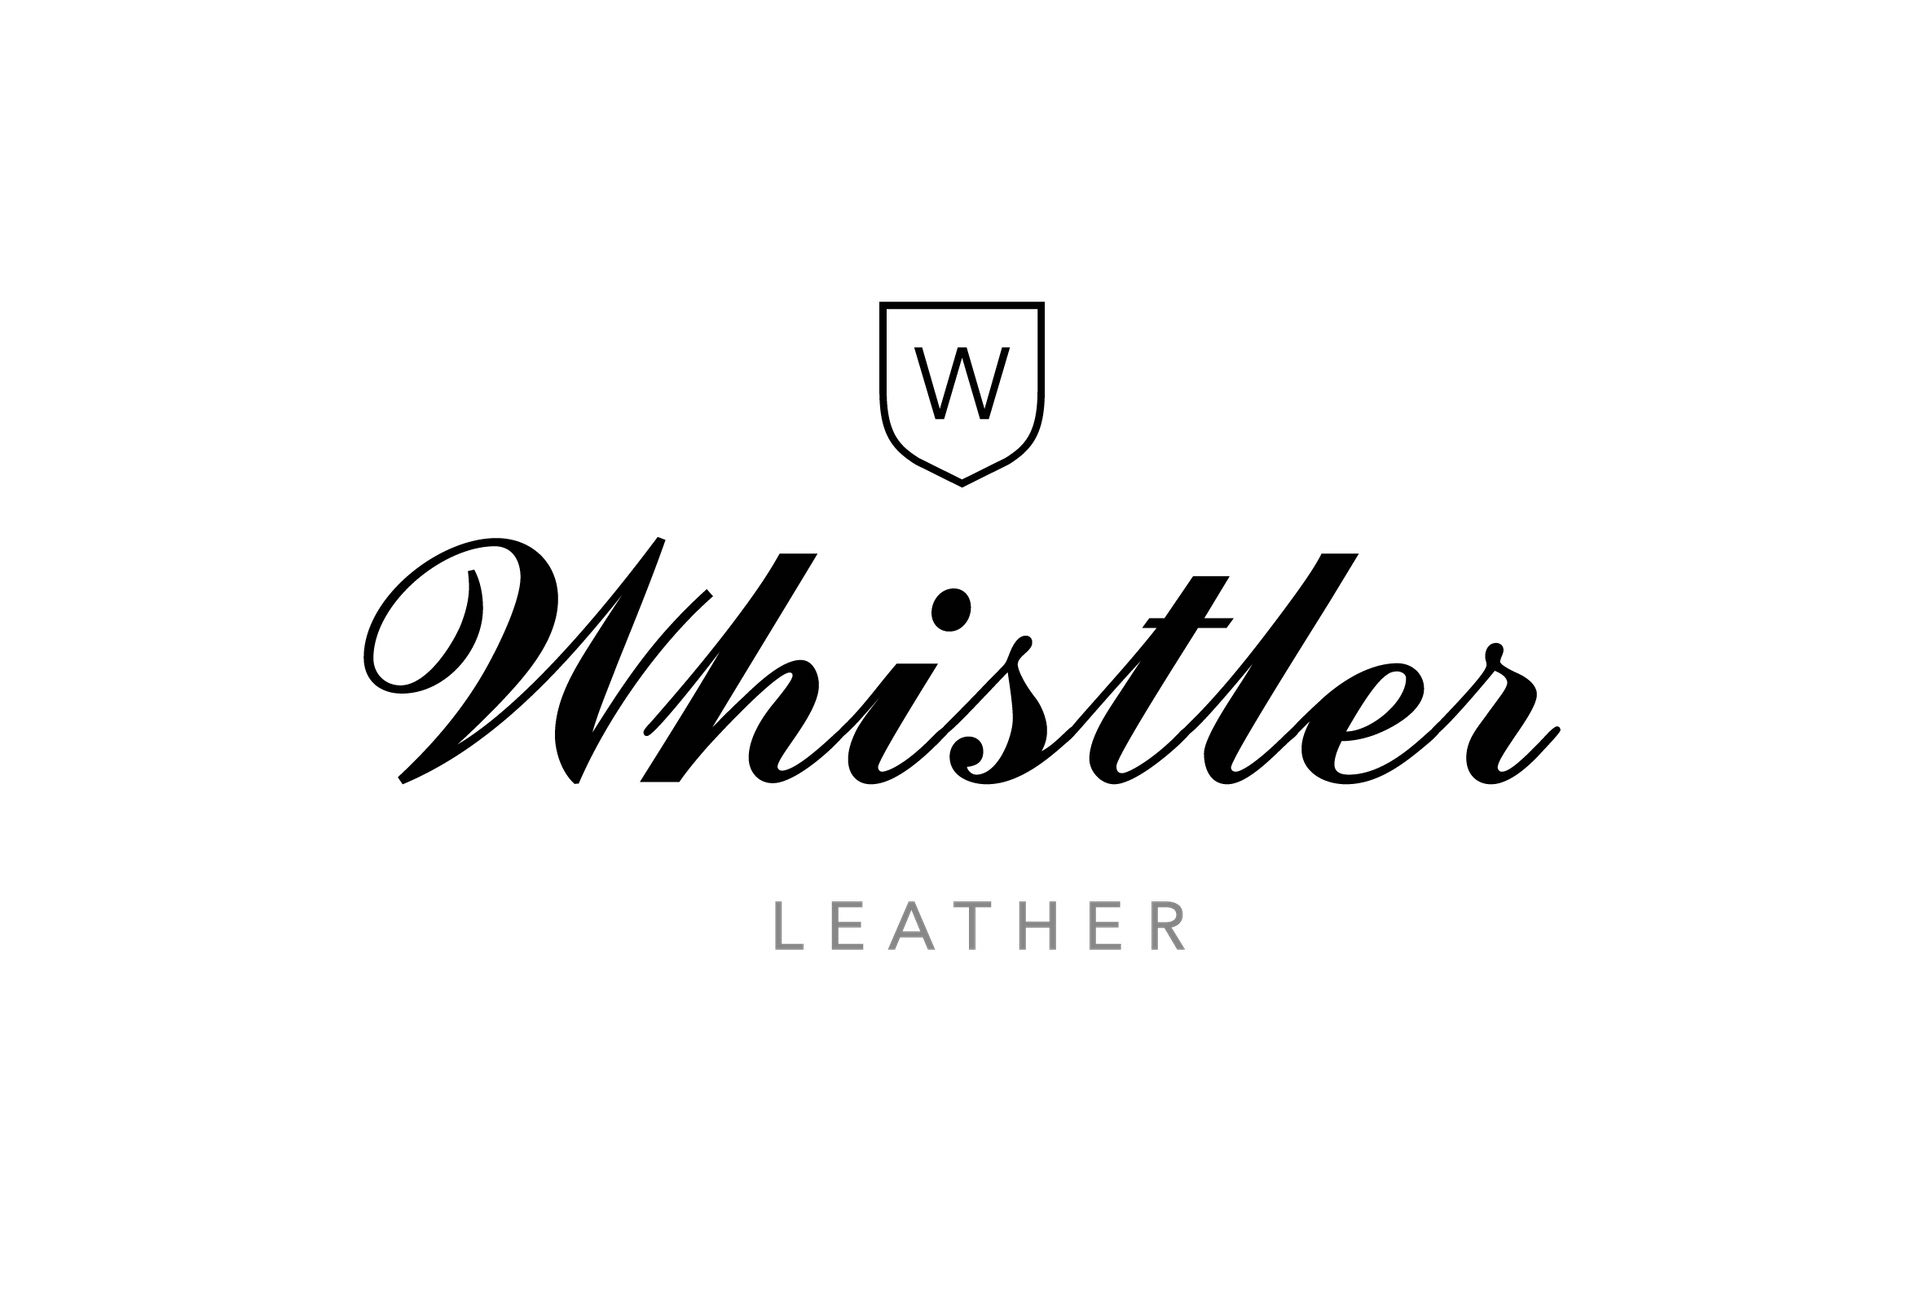 Whistler Leather